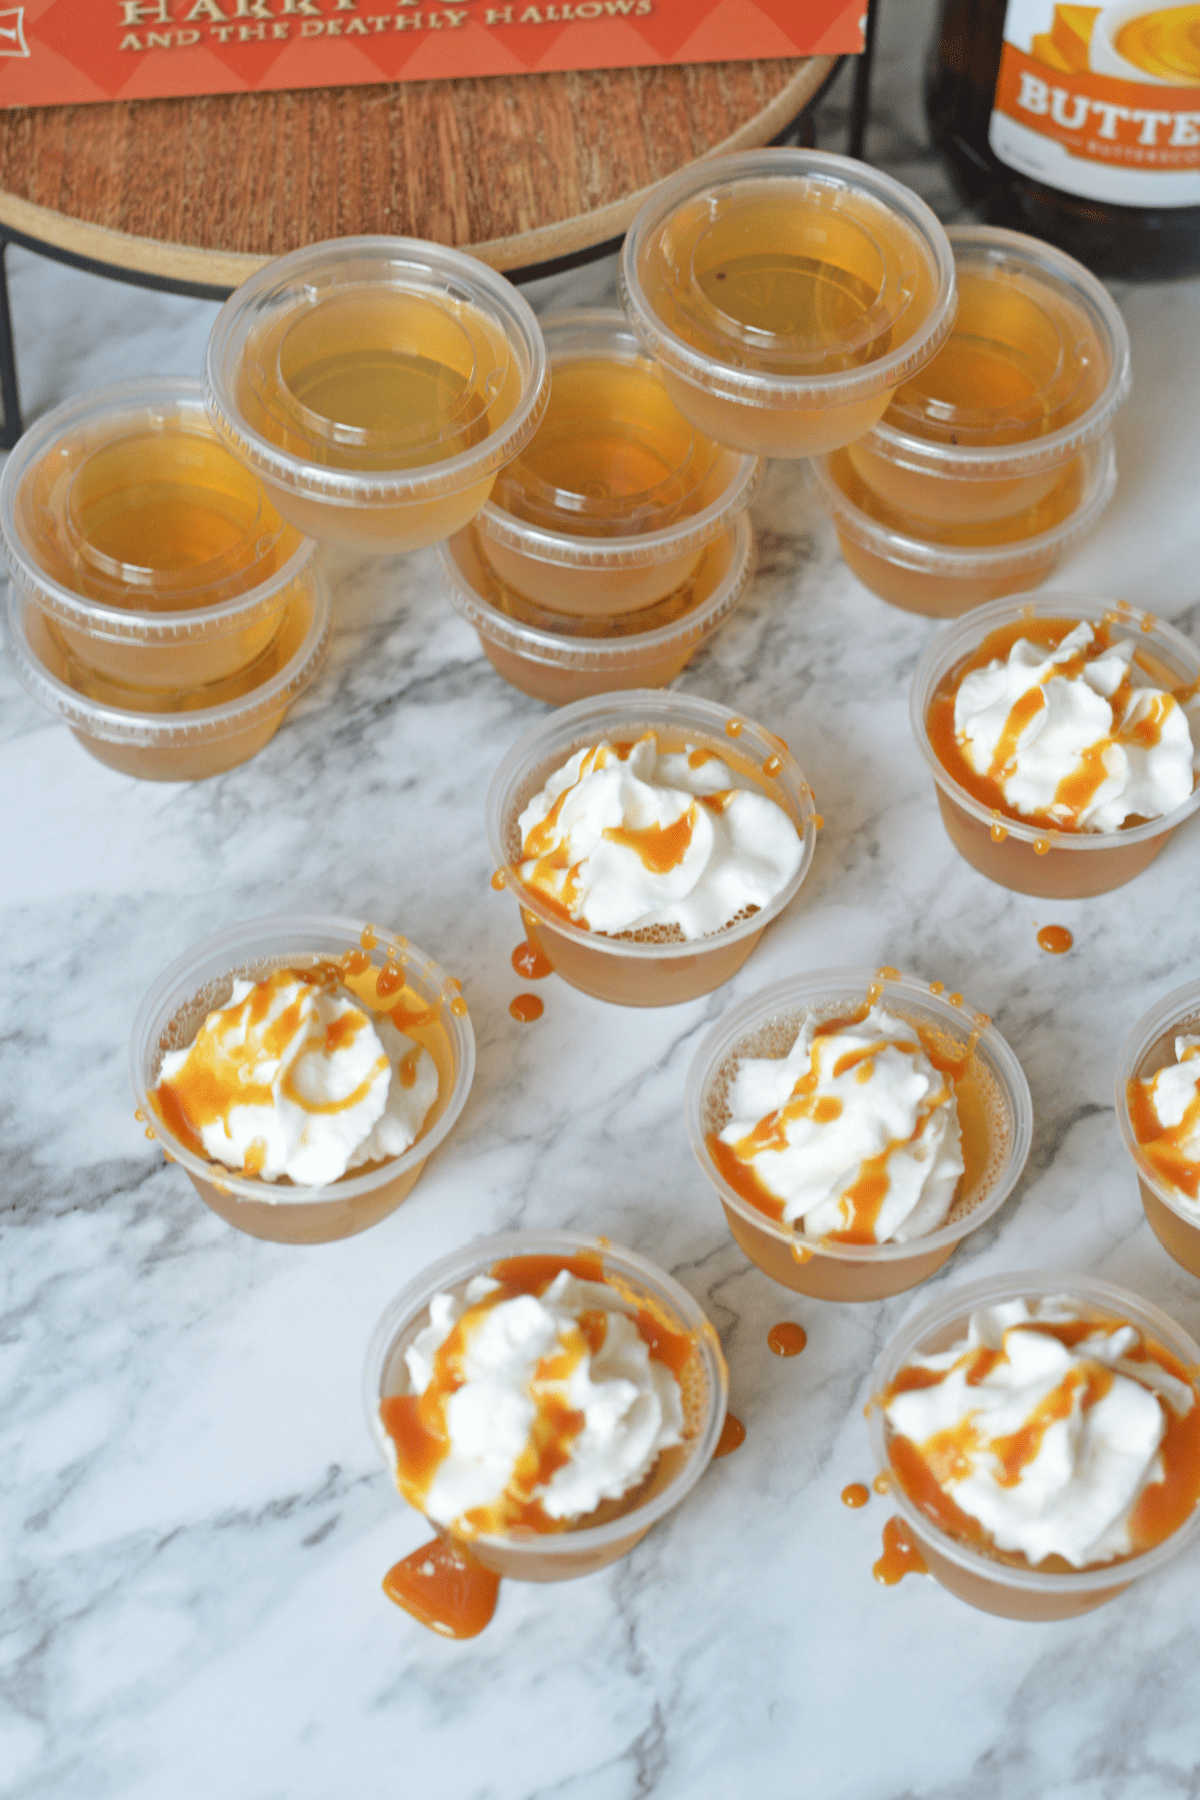 Butterbeer jello shots from above